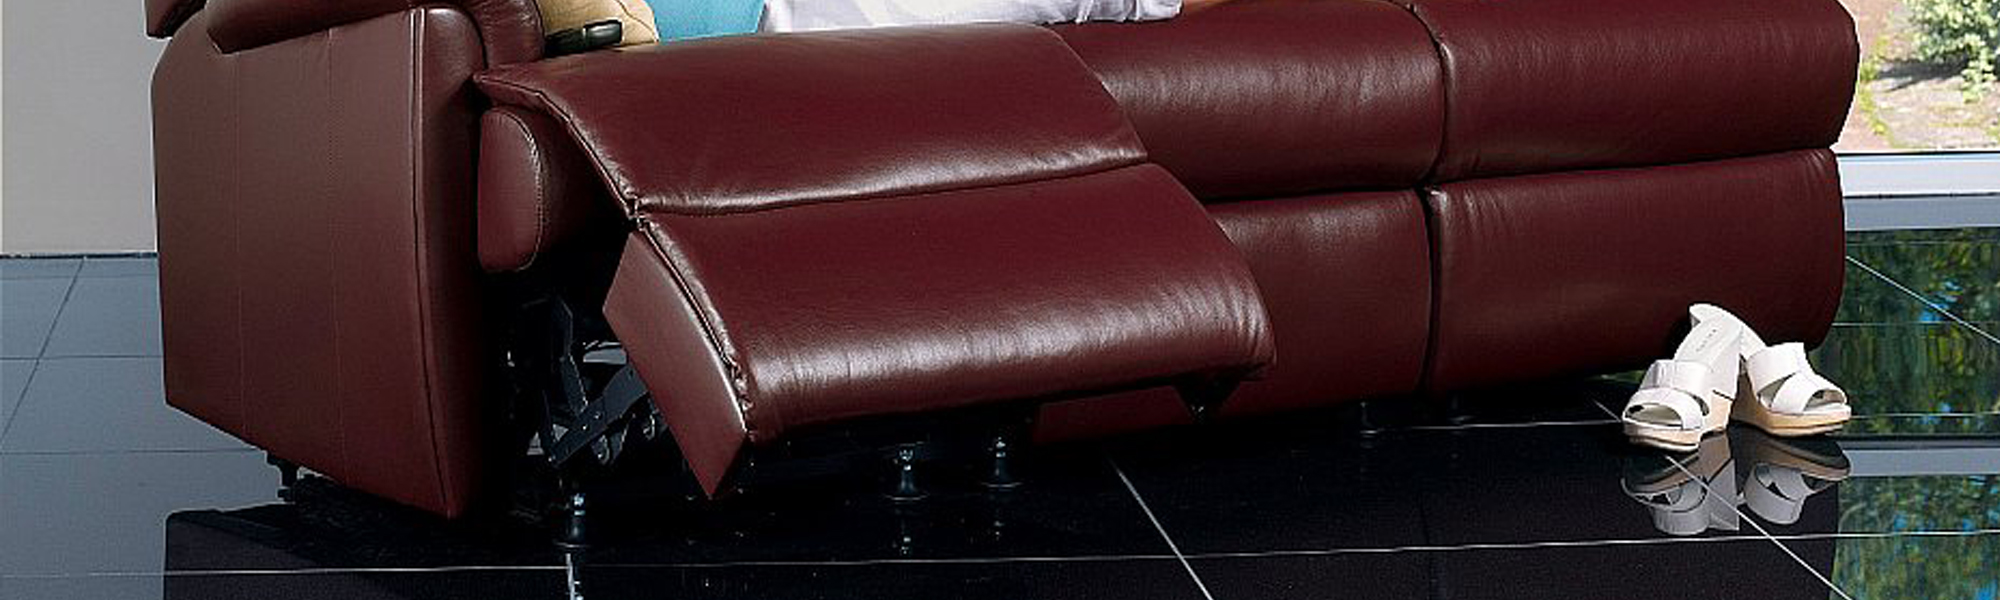 Leather 3 Seater Power Recliner Sofas